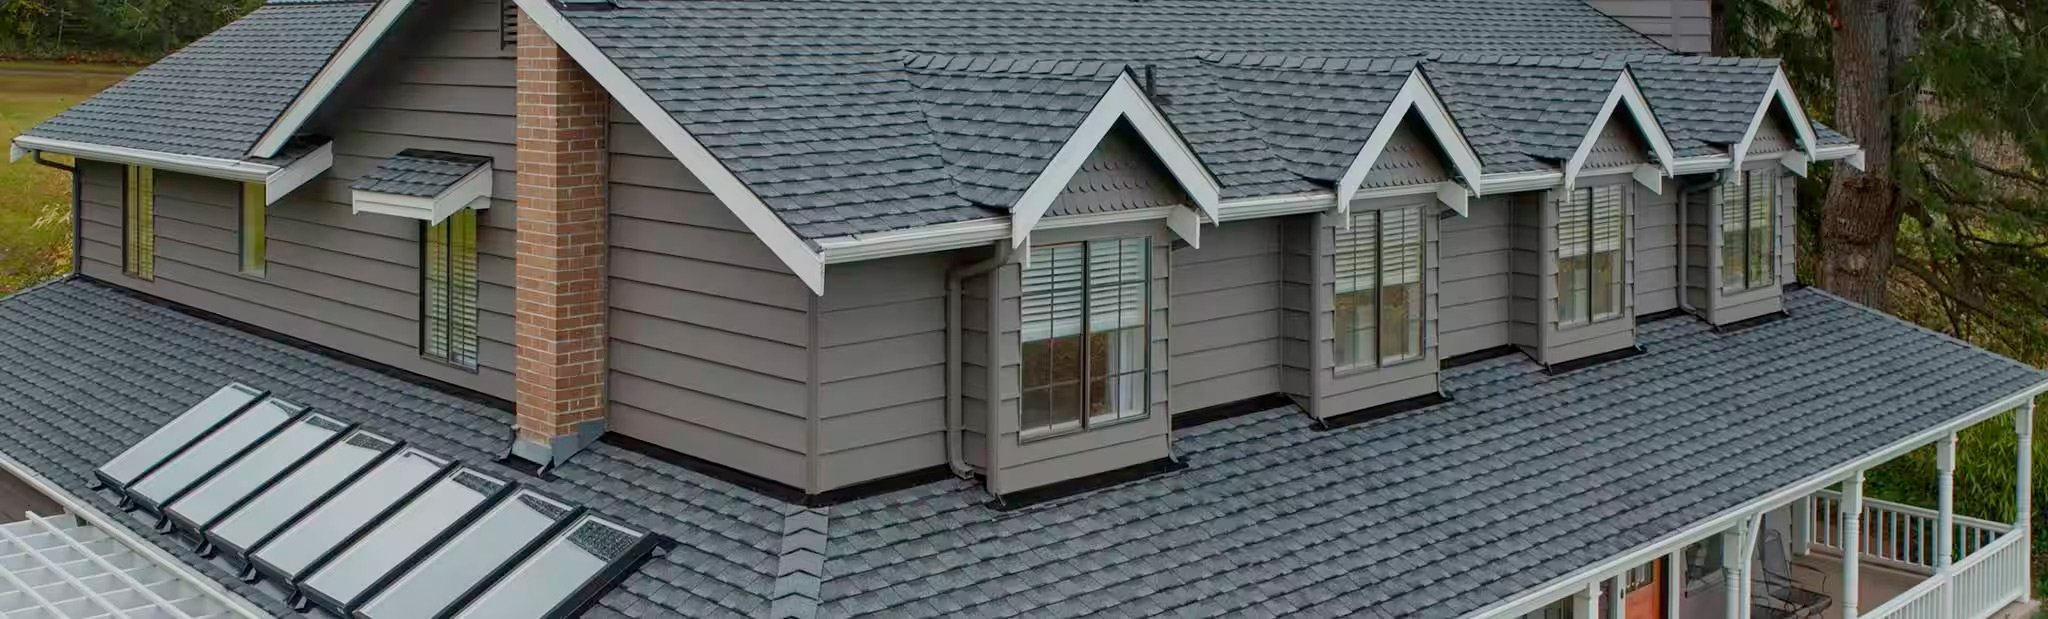 Roofing Companies Near Me That Offer Financing